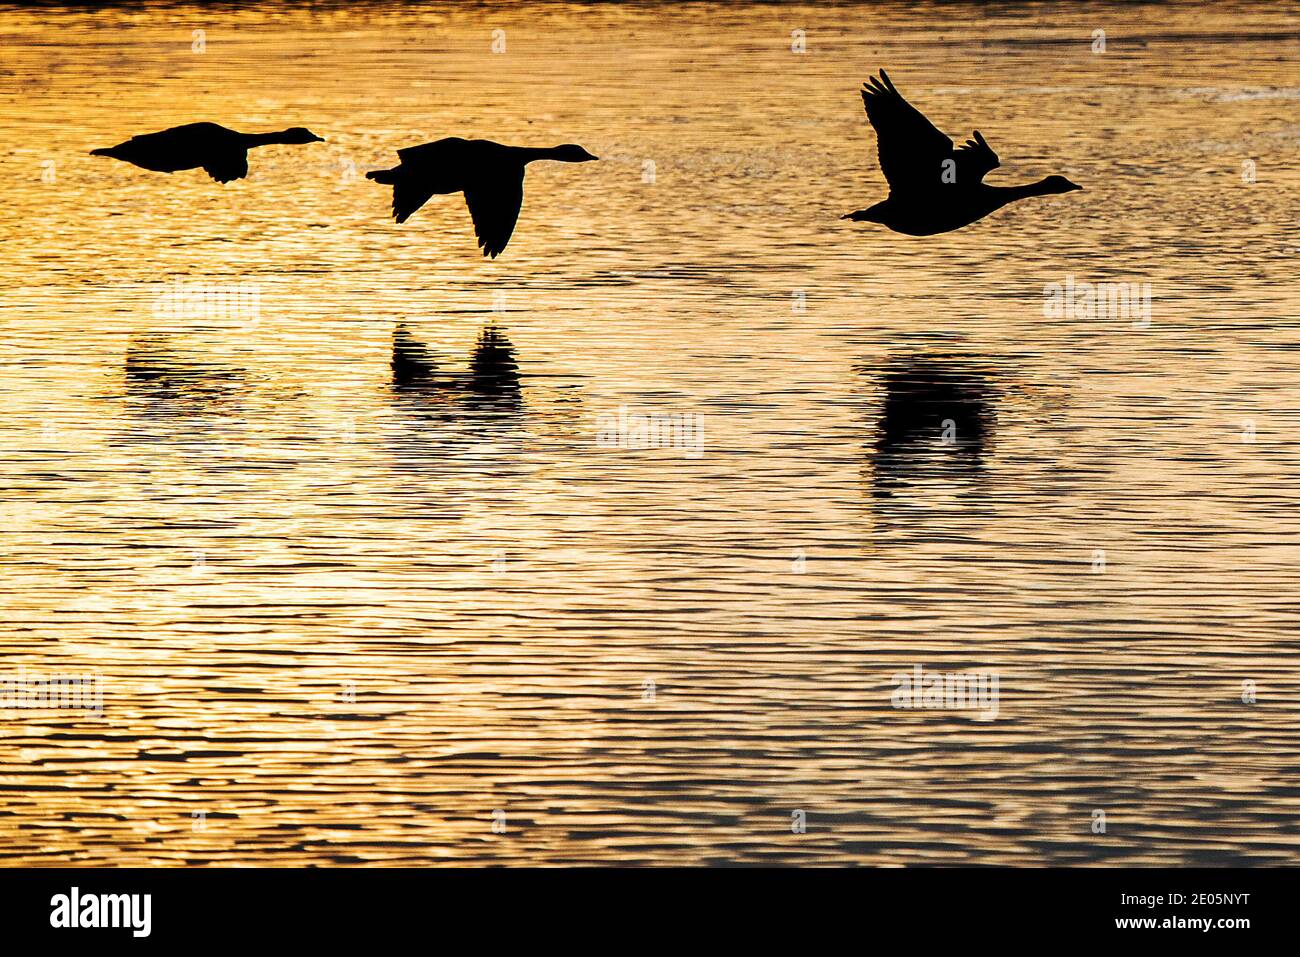 Gunthorpe, Nottinghamshire, UK. 30th Dec 2020. Canada geese silhouetted on the River Trent near Gunthorpe, Nottinghamshire. Neil Squires/Alamy Live News Stock Photo